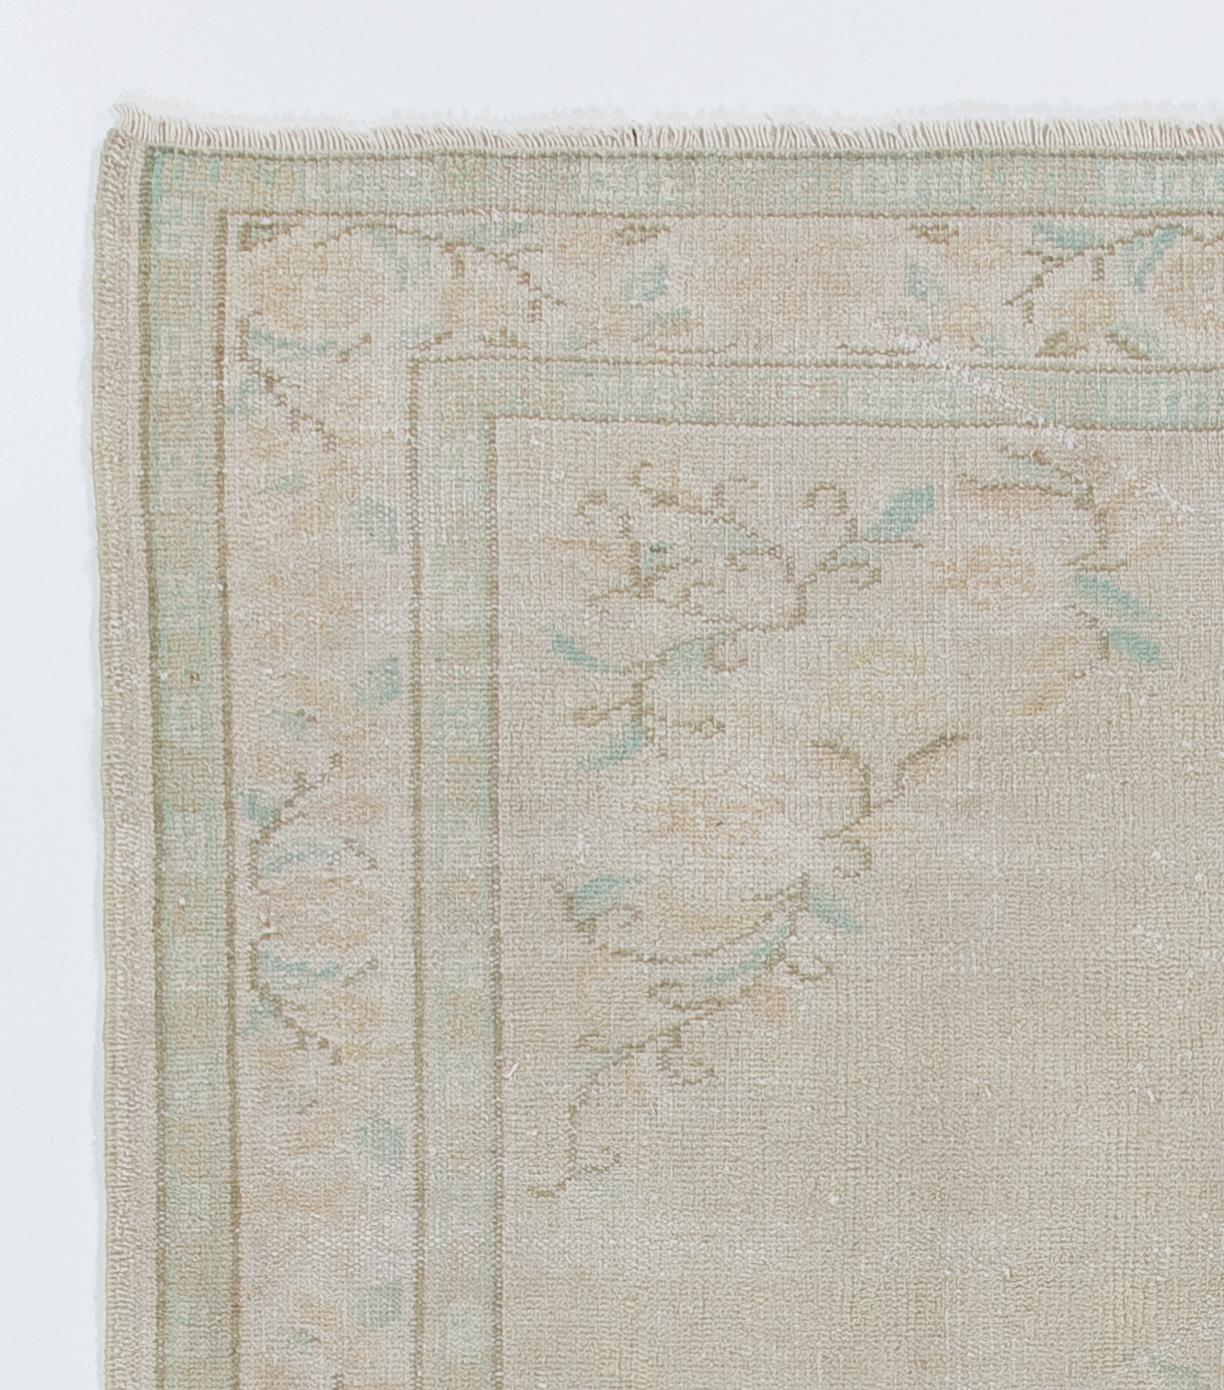 A finely hand-knotted vintage Turkish carpet from 1960s featuring a design inspired by Art Deco Chinese style with soft contoured floral motifs in neutral, pastel tones of golden sand and light aqua green, filling in the border, the corners of the